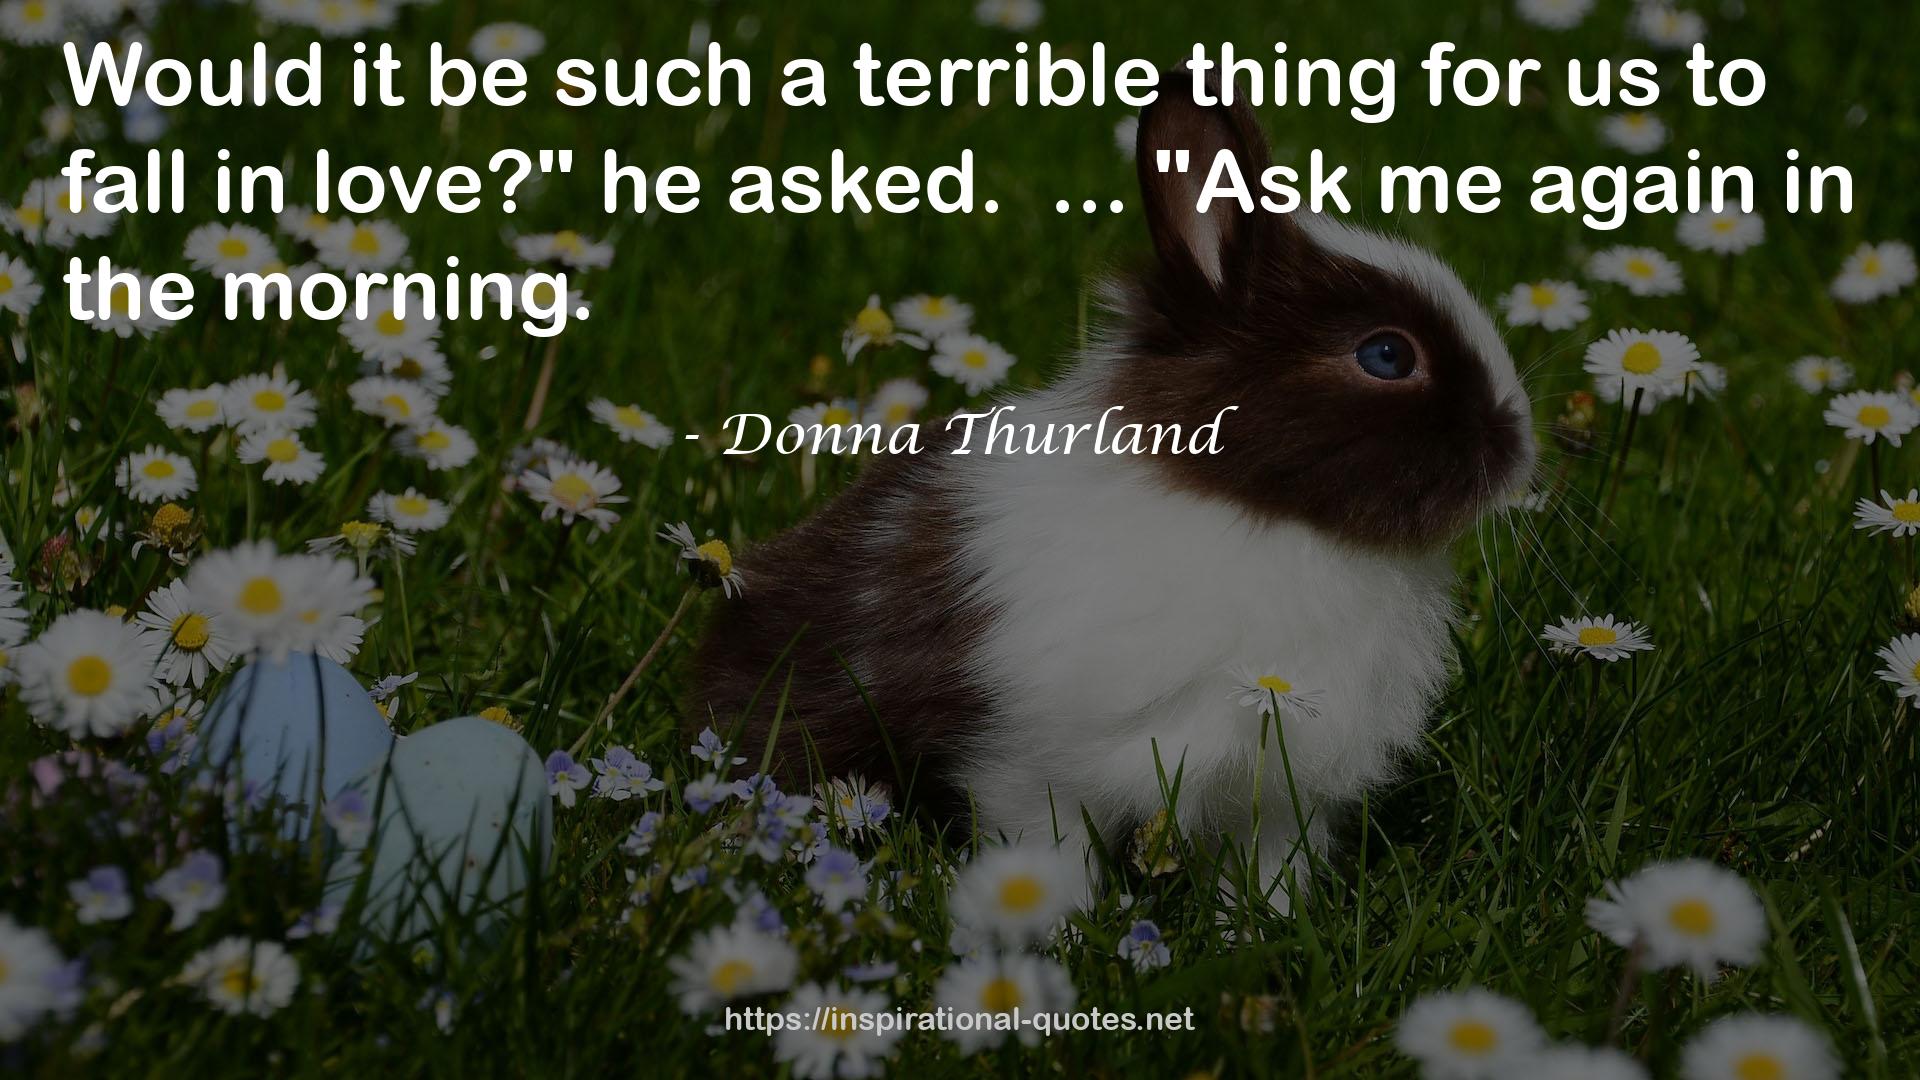 Donna Thurland QUOTES